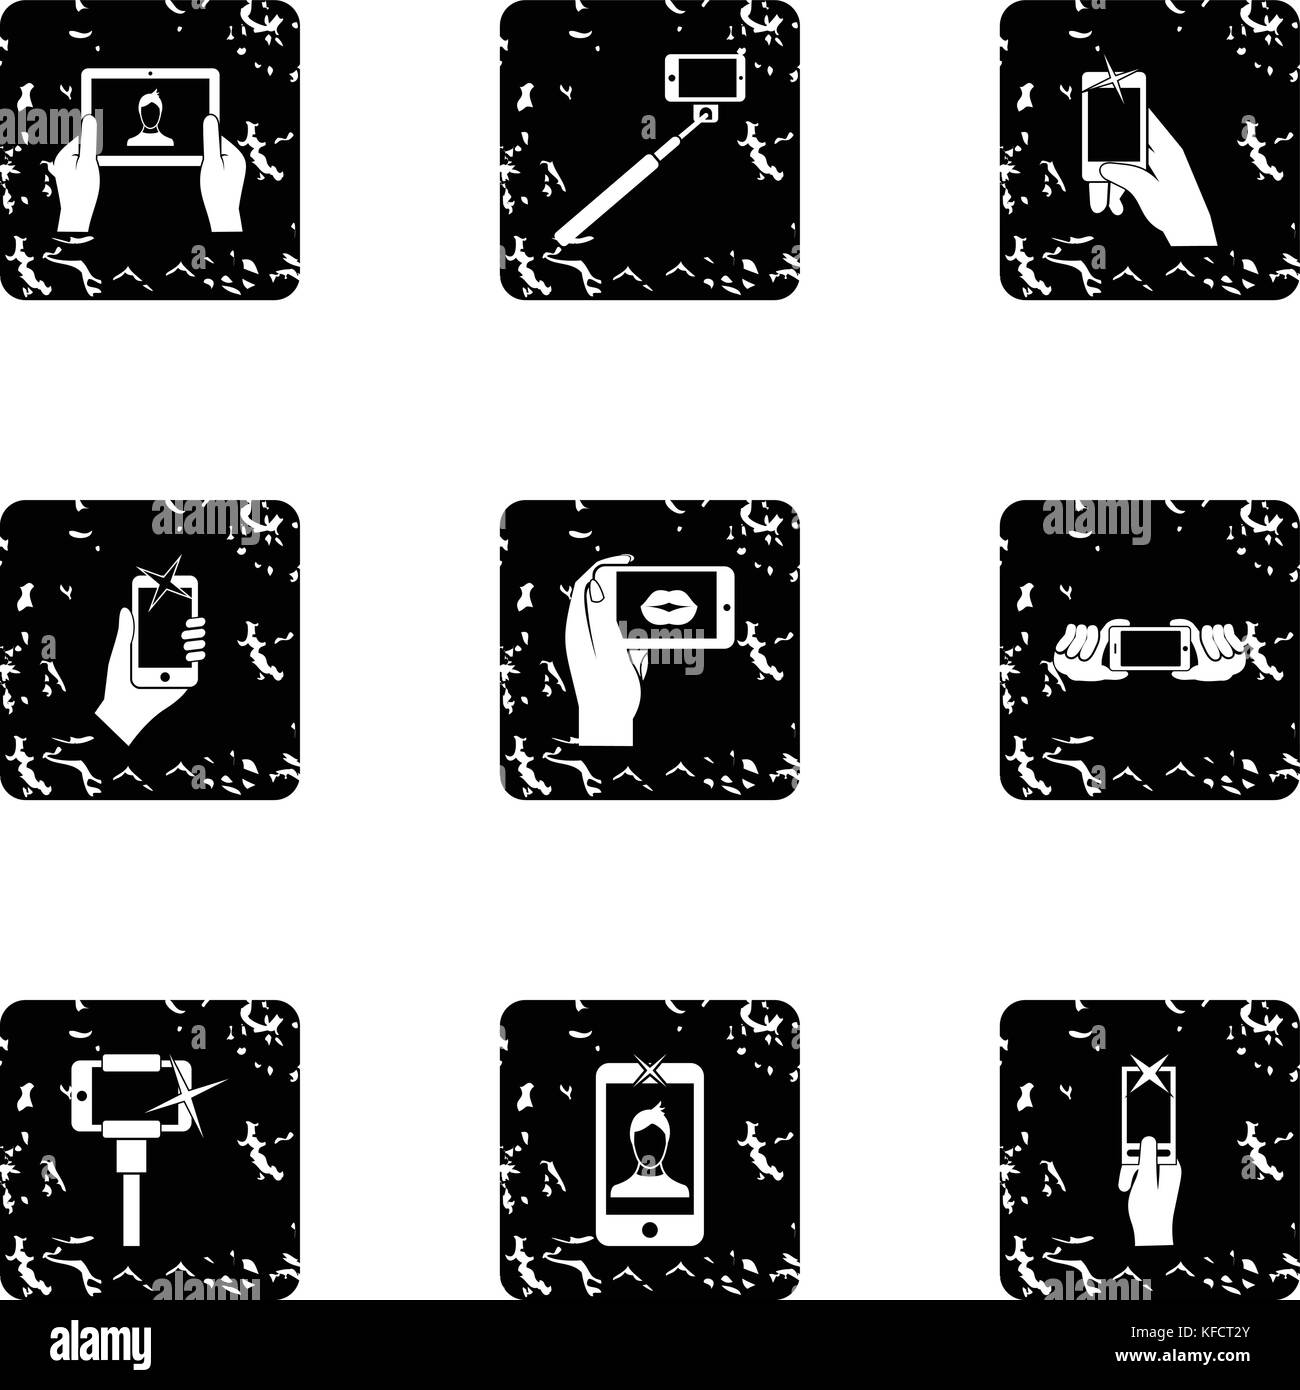 Shooting on cell phone icons set, grunge style Stock Vector